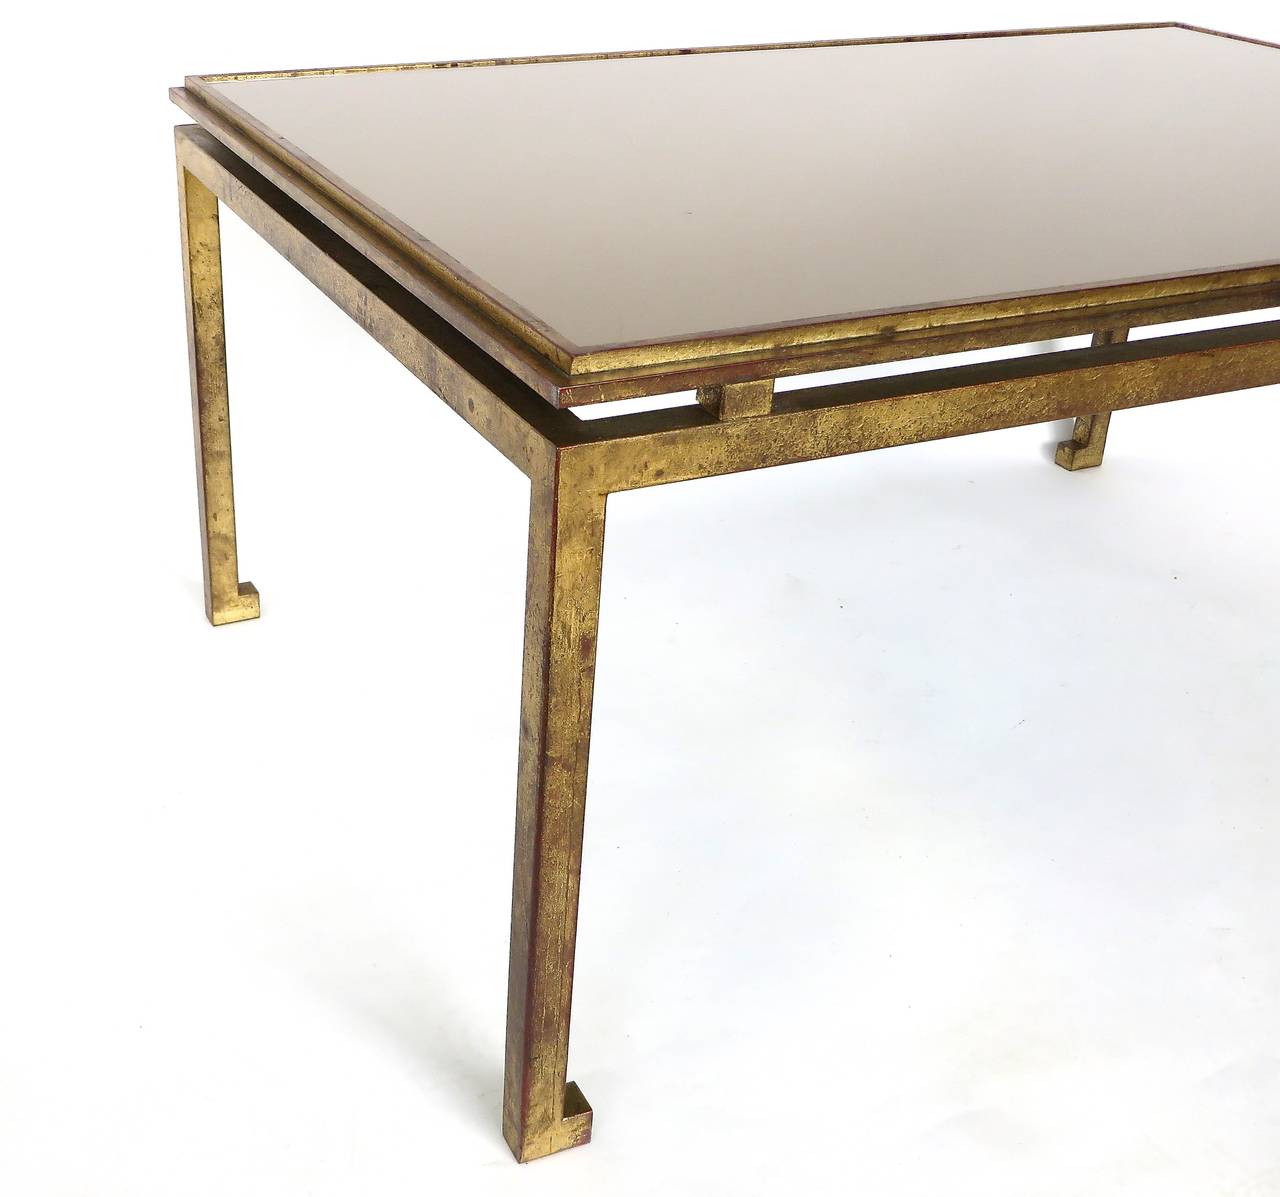 Maison Ramsay French Patina Gold Leaf Wrought Iron Coffee Table 1